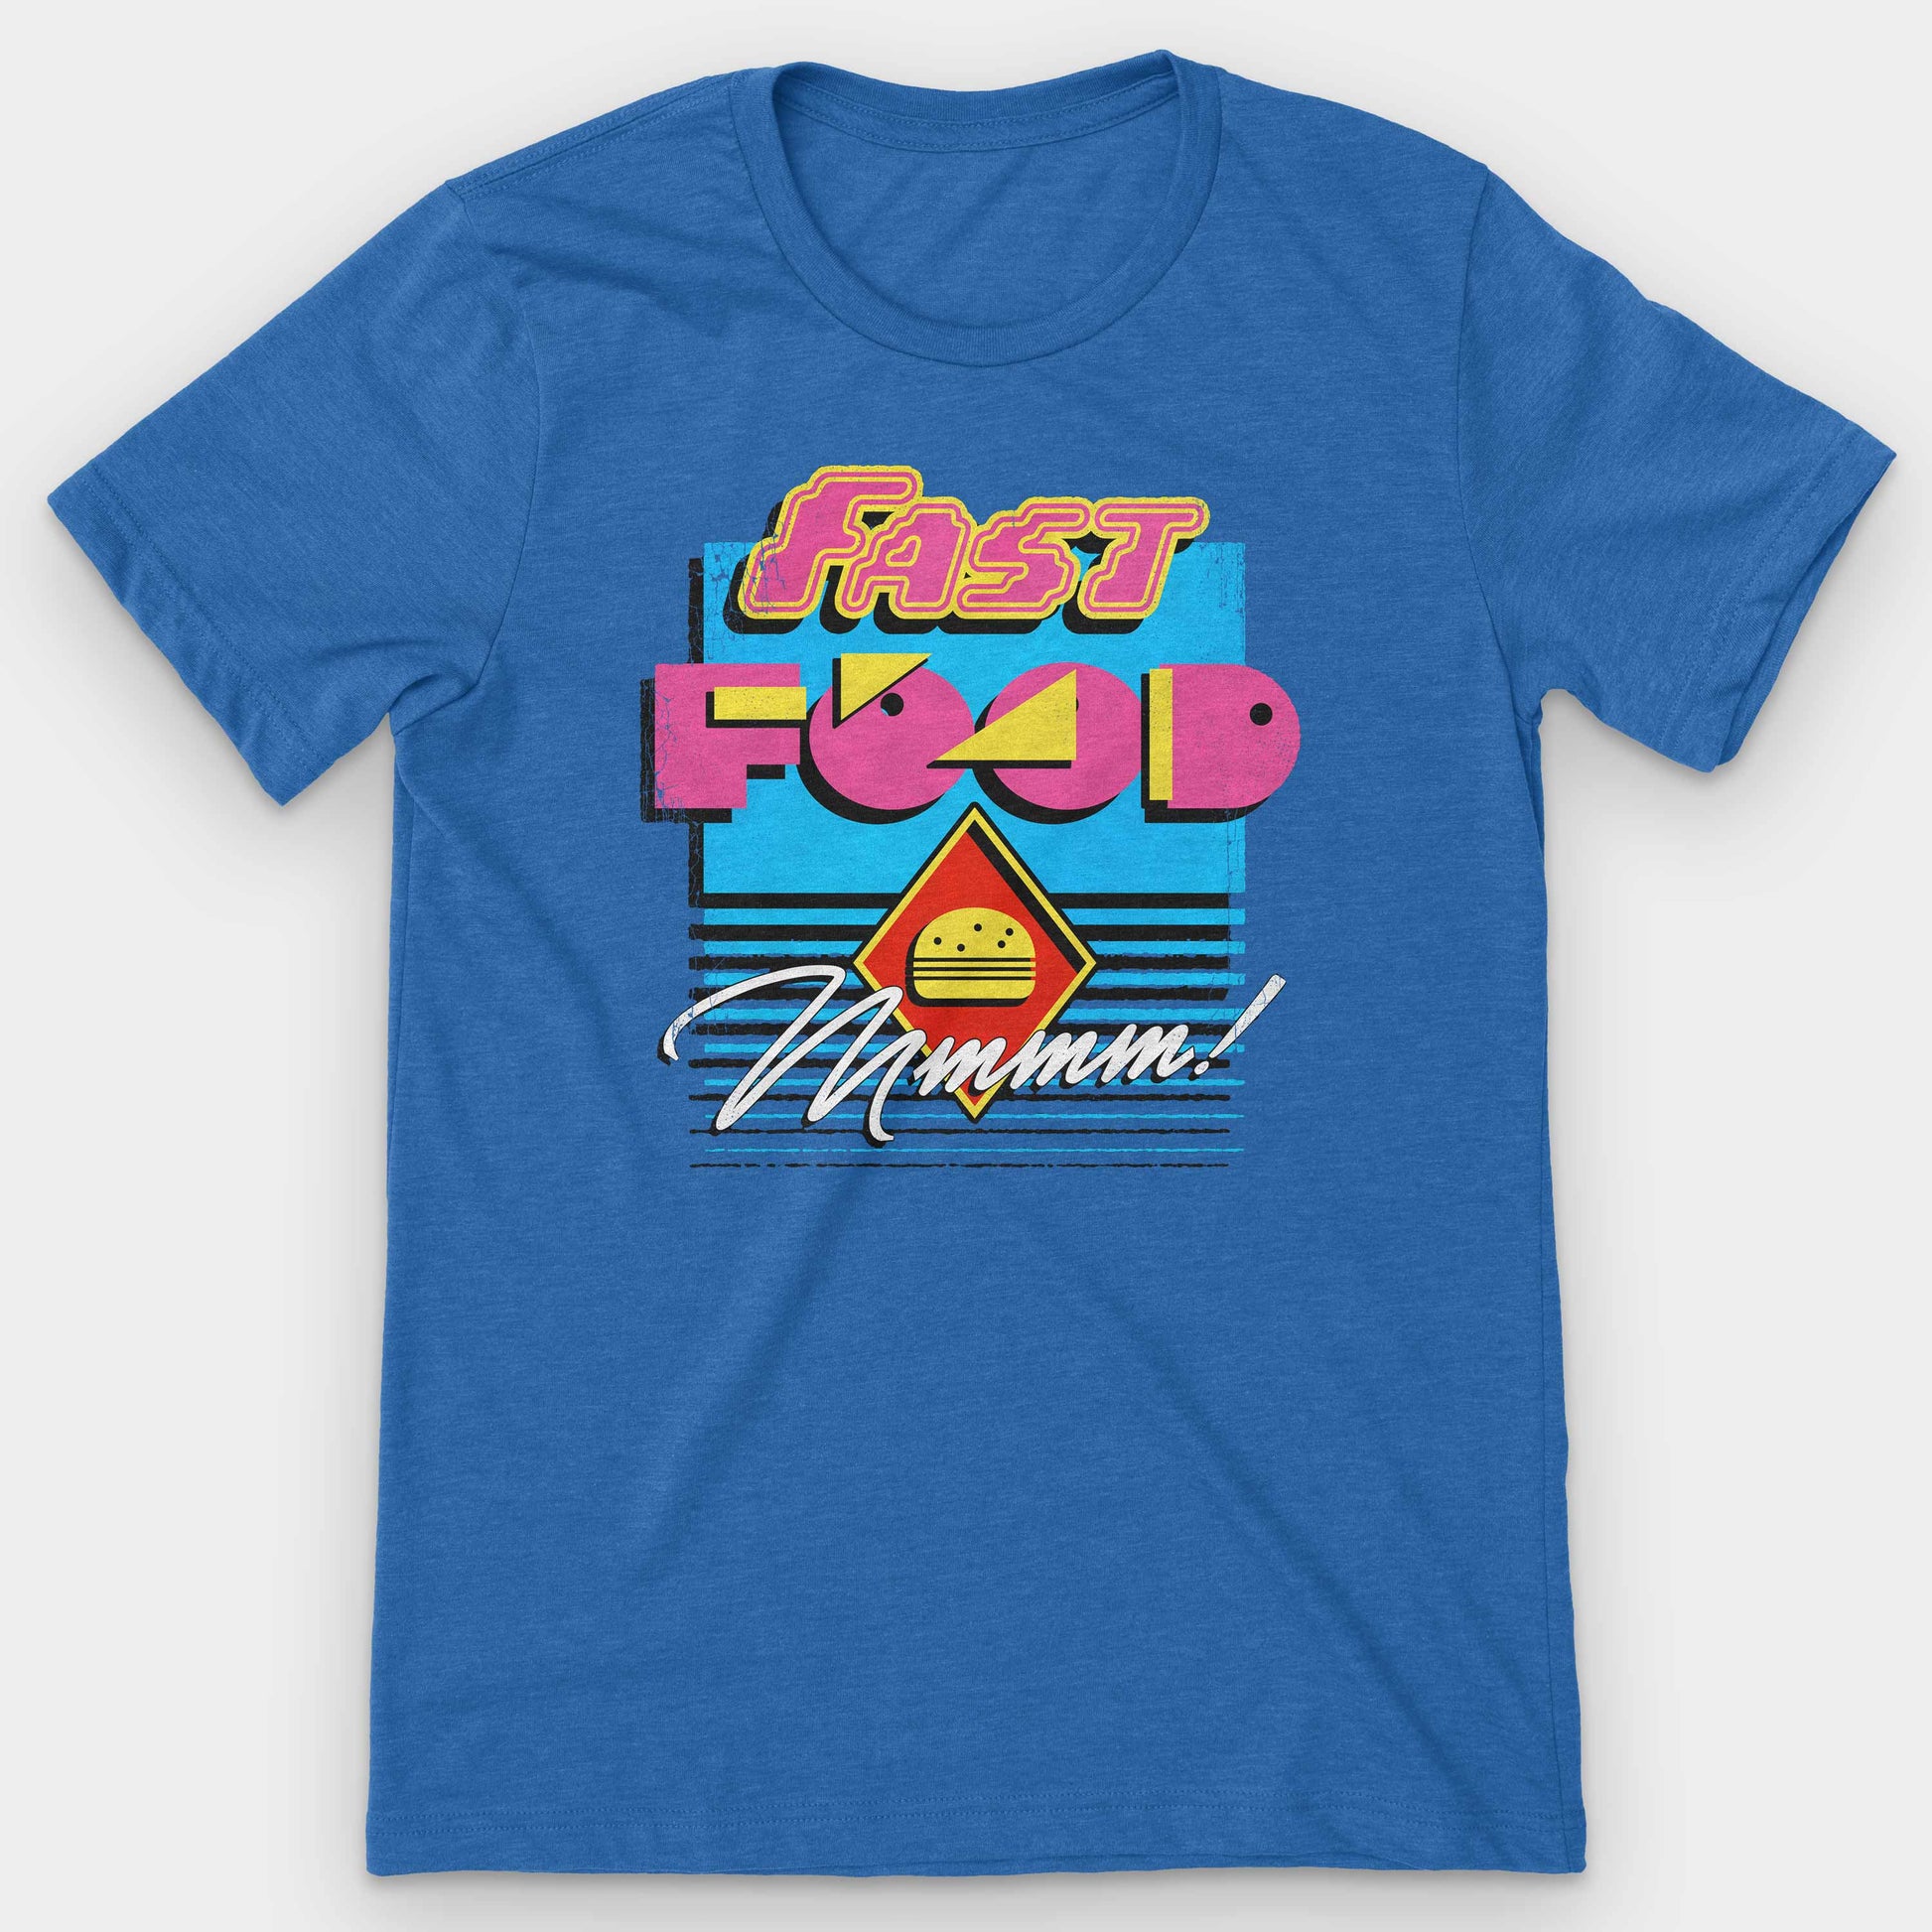 Heather True Royal 90s Fast Food Graphic T-Shirt by Snaxtime